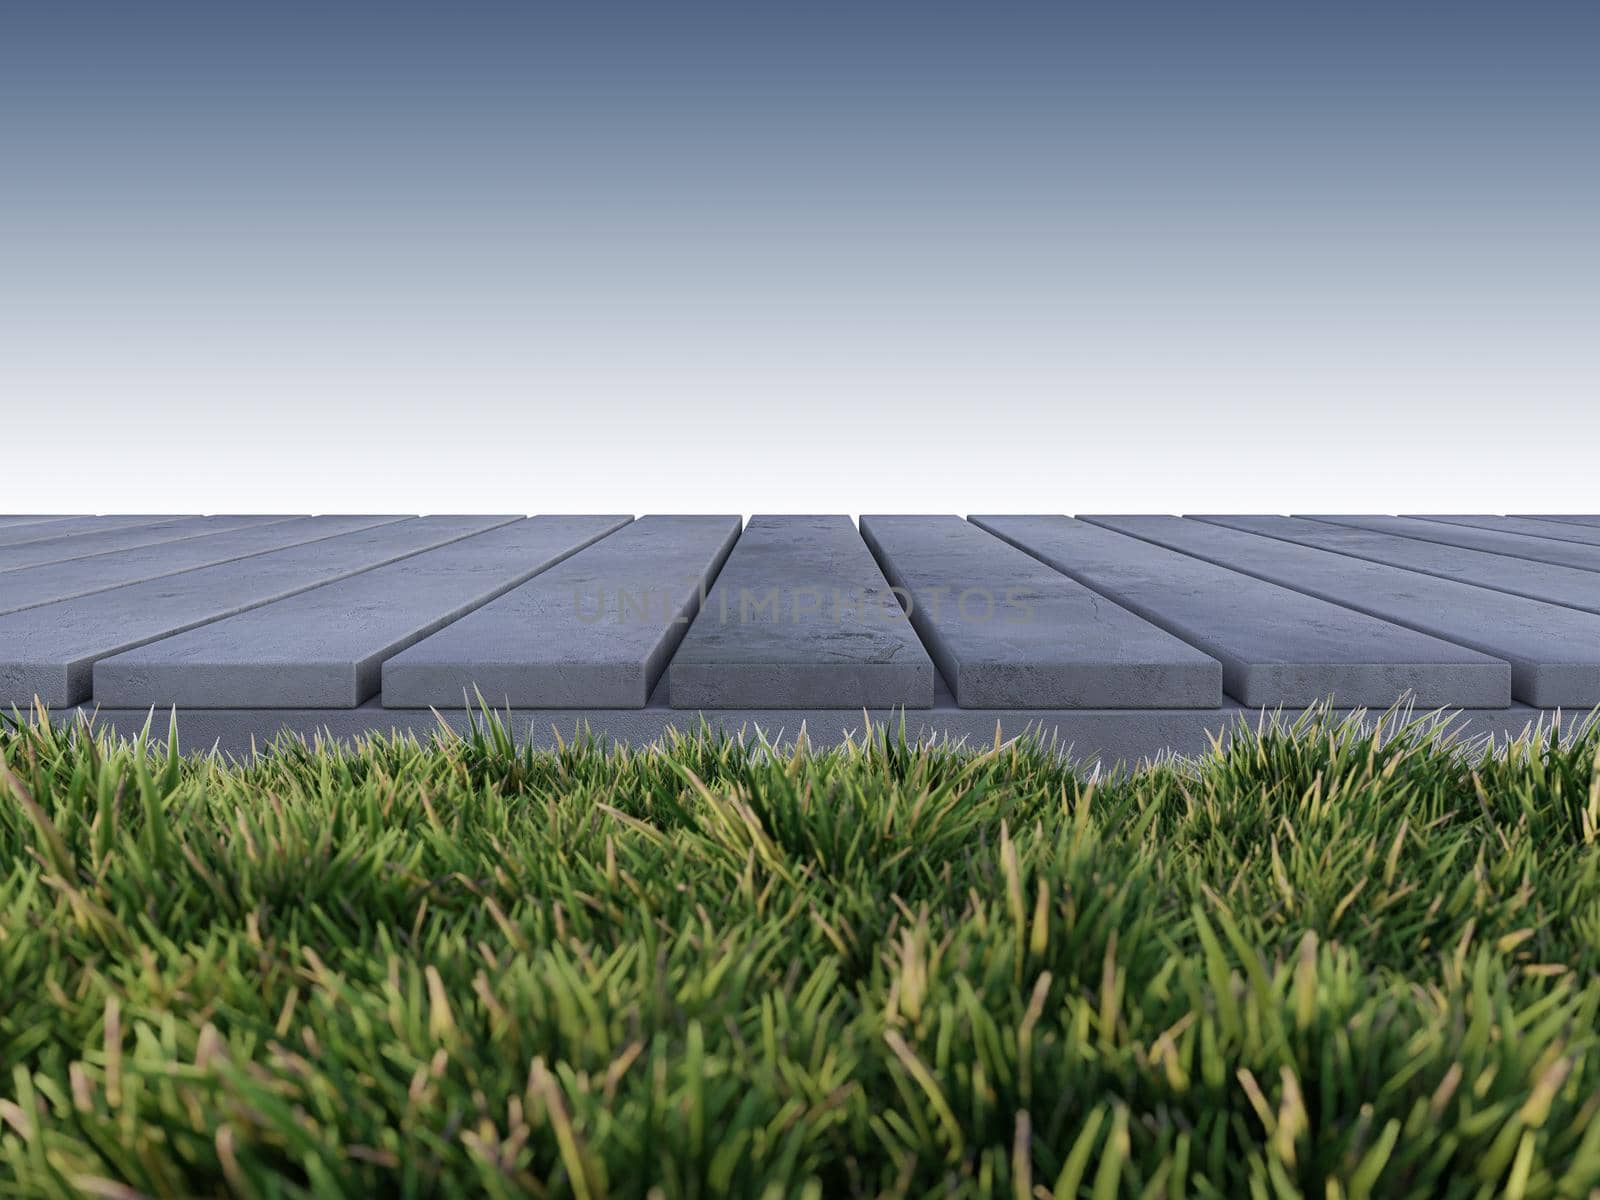 Mockup background for 3d rendering of old cracked concrete panel which have grasses as foreground.